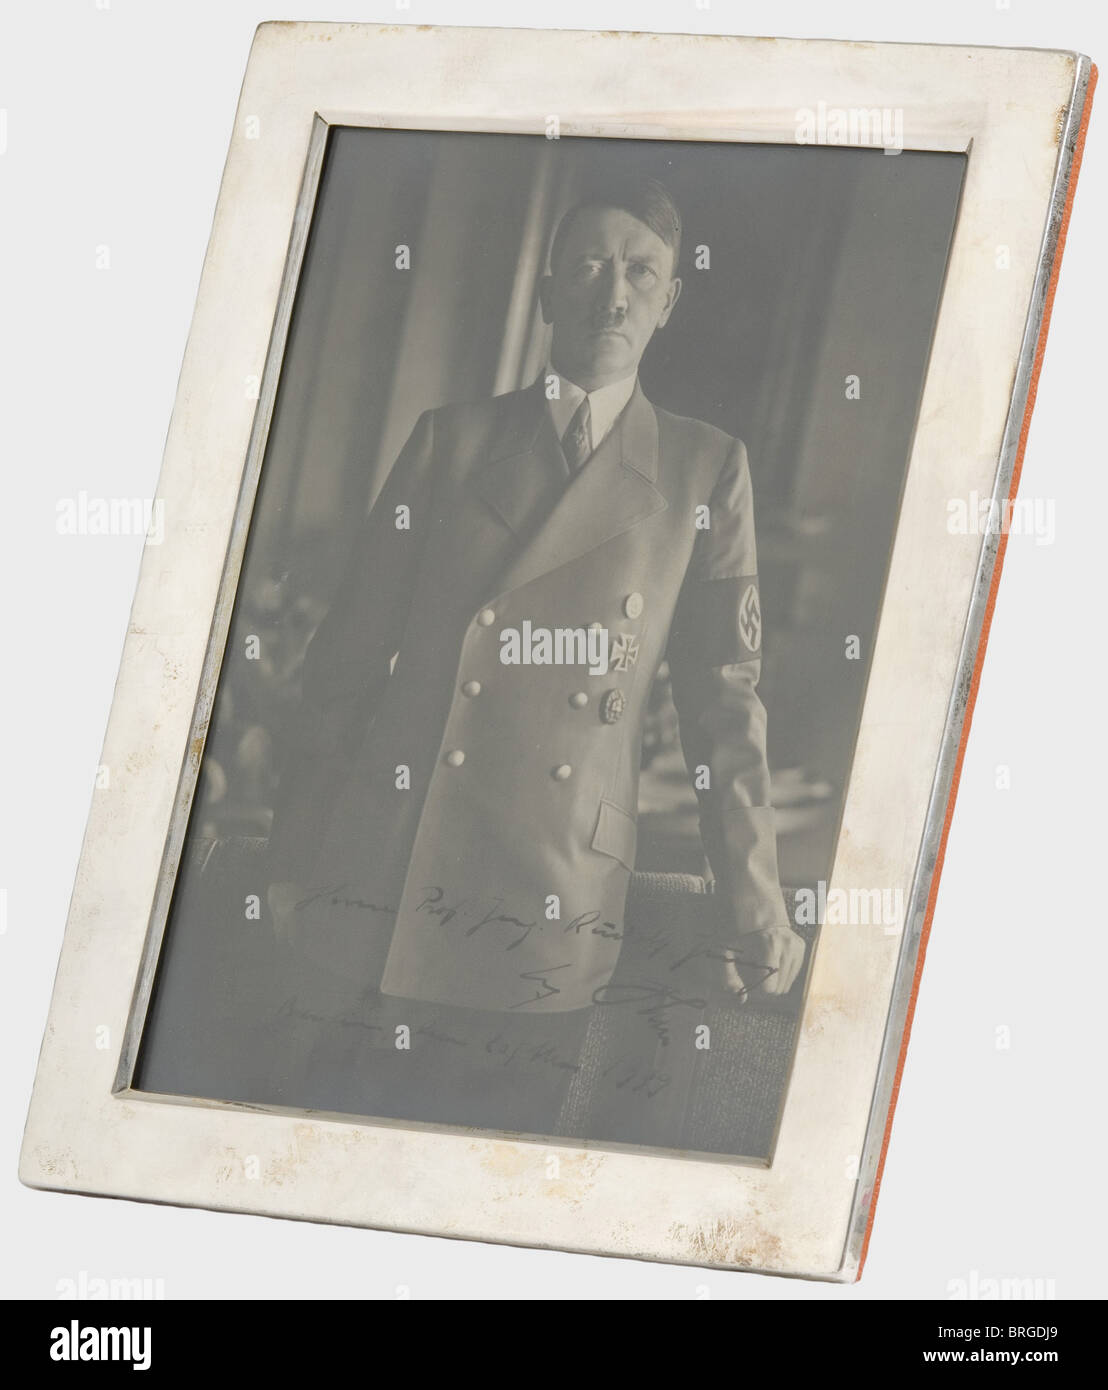 Professor Rudolf Jung (1882 - 1945), an Adolf Hitler dedication photograph Large format photograph in party uniform with ink dedication on the lower edge 'Herrn Prof. Ing. Rudolf Jung - Adolf Hitler - Berlin, den 20/Mai 1939' (To Engineering Professor Rudolf Jung - Adolf Hitler - Berlin, 20th May 1939) in a silver frame (925 WTB) with light red leather reverse and frame support. 27 x 21 cm. The trans people, 1930s, 20th century, NS, National Socialism, Nazism, Third Reich, German Reich, Germany, German, National Socialist, Nazi, Nazi period, fascism, object, ob, Stock Photo